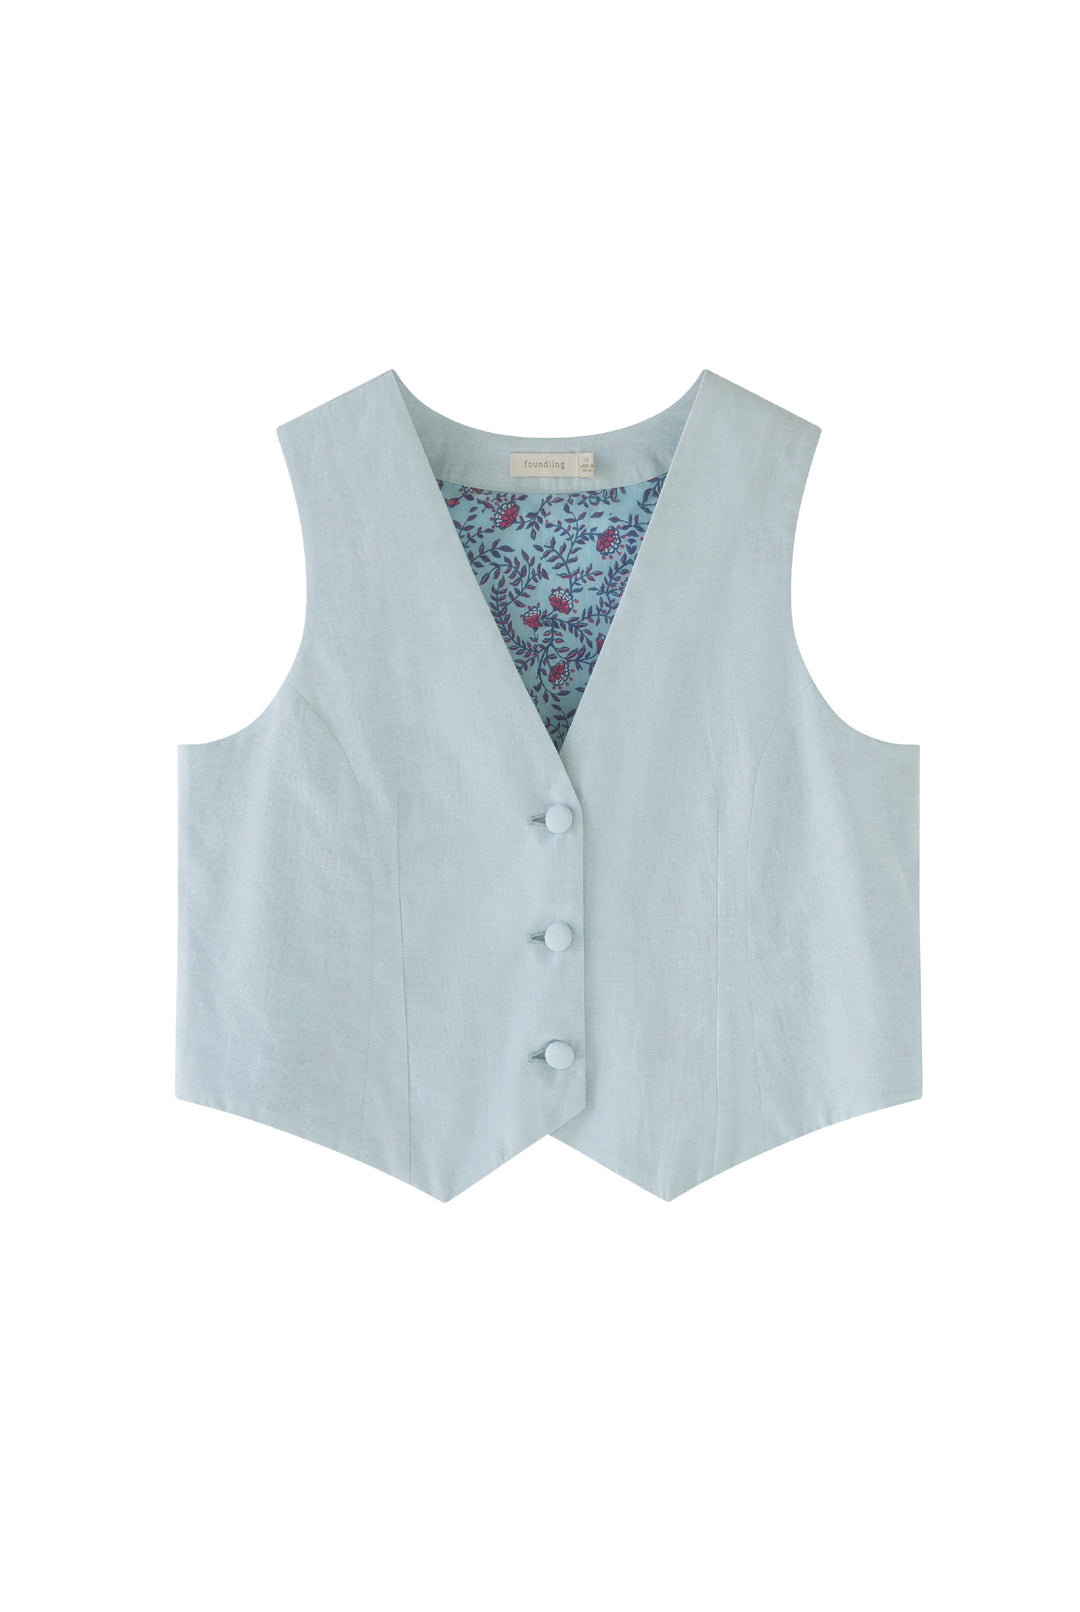 Forget Me Not Chambray Waistcoat